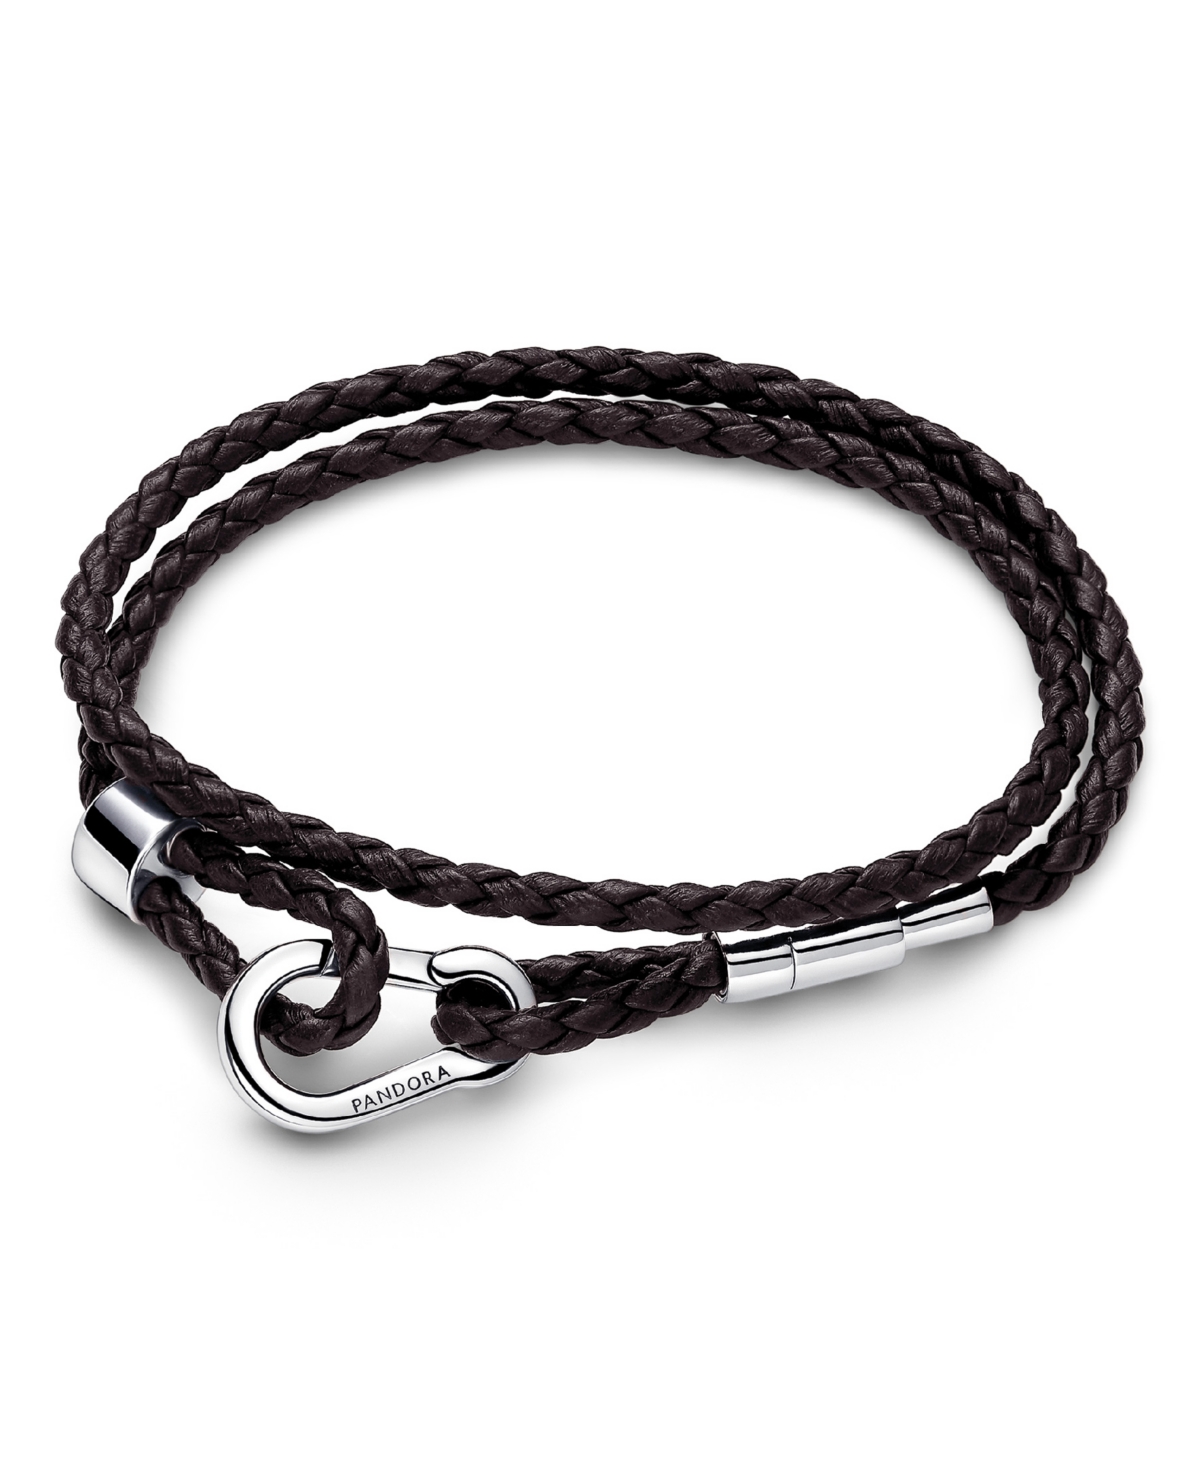 Pandora Brown Braided Double Leather Bracelet In Black